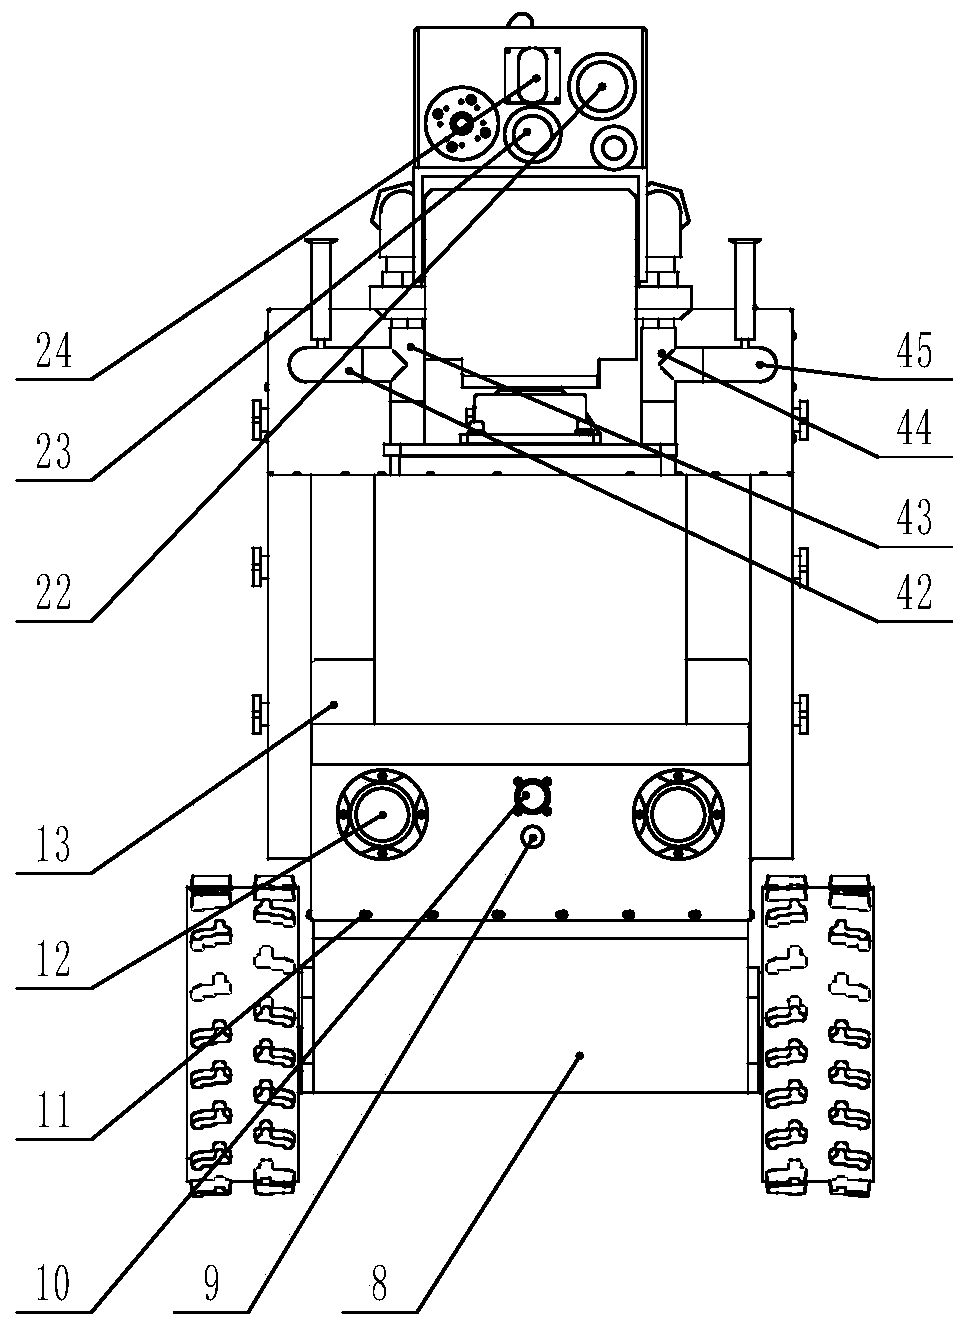 Substation fire-fighting continuous operation system and method